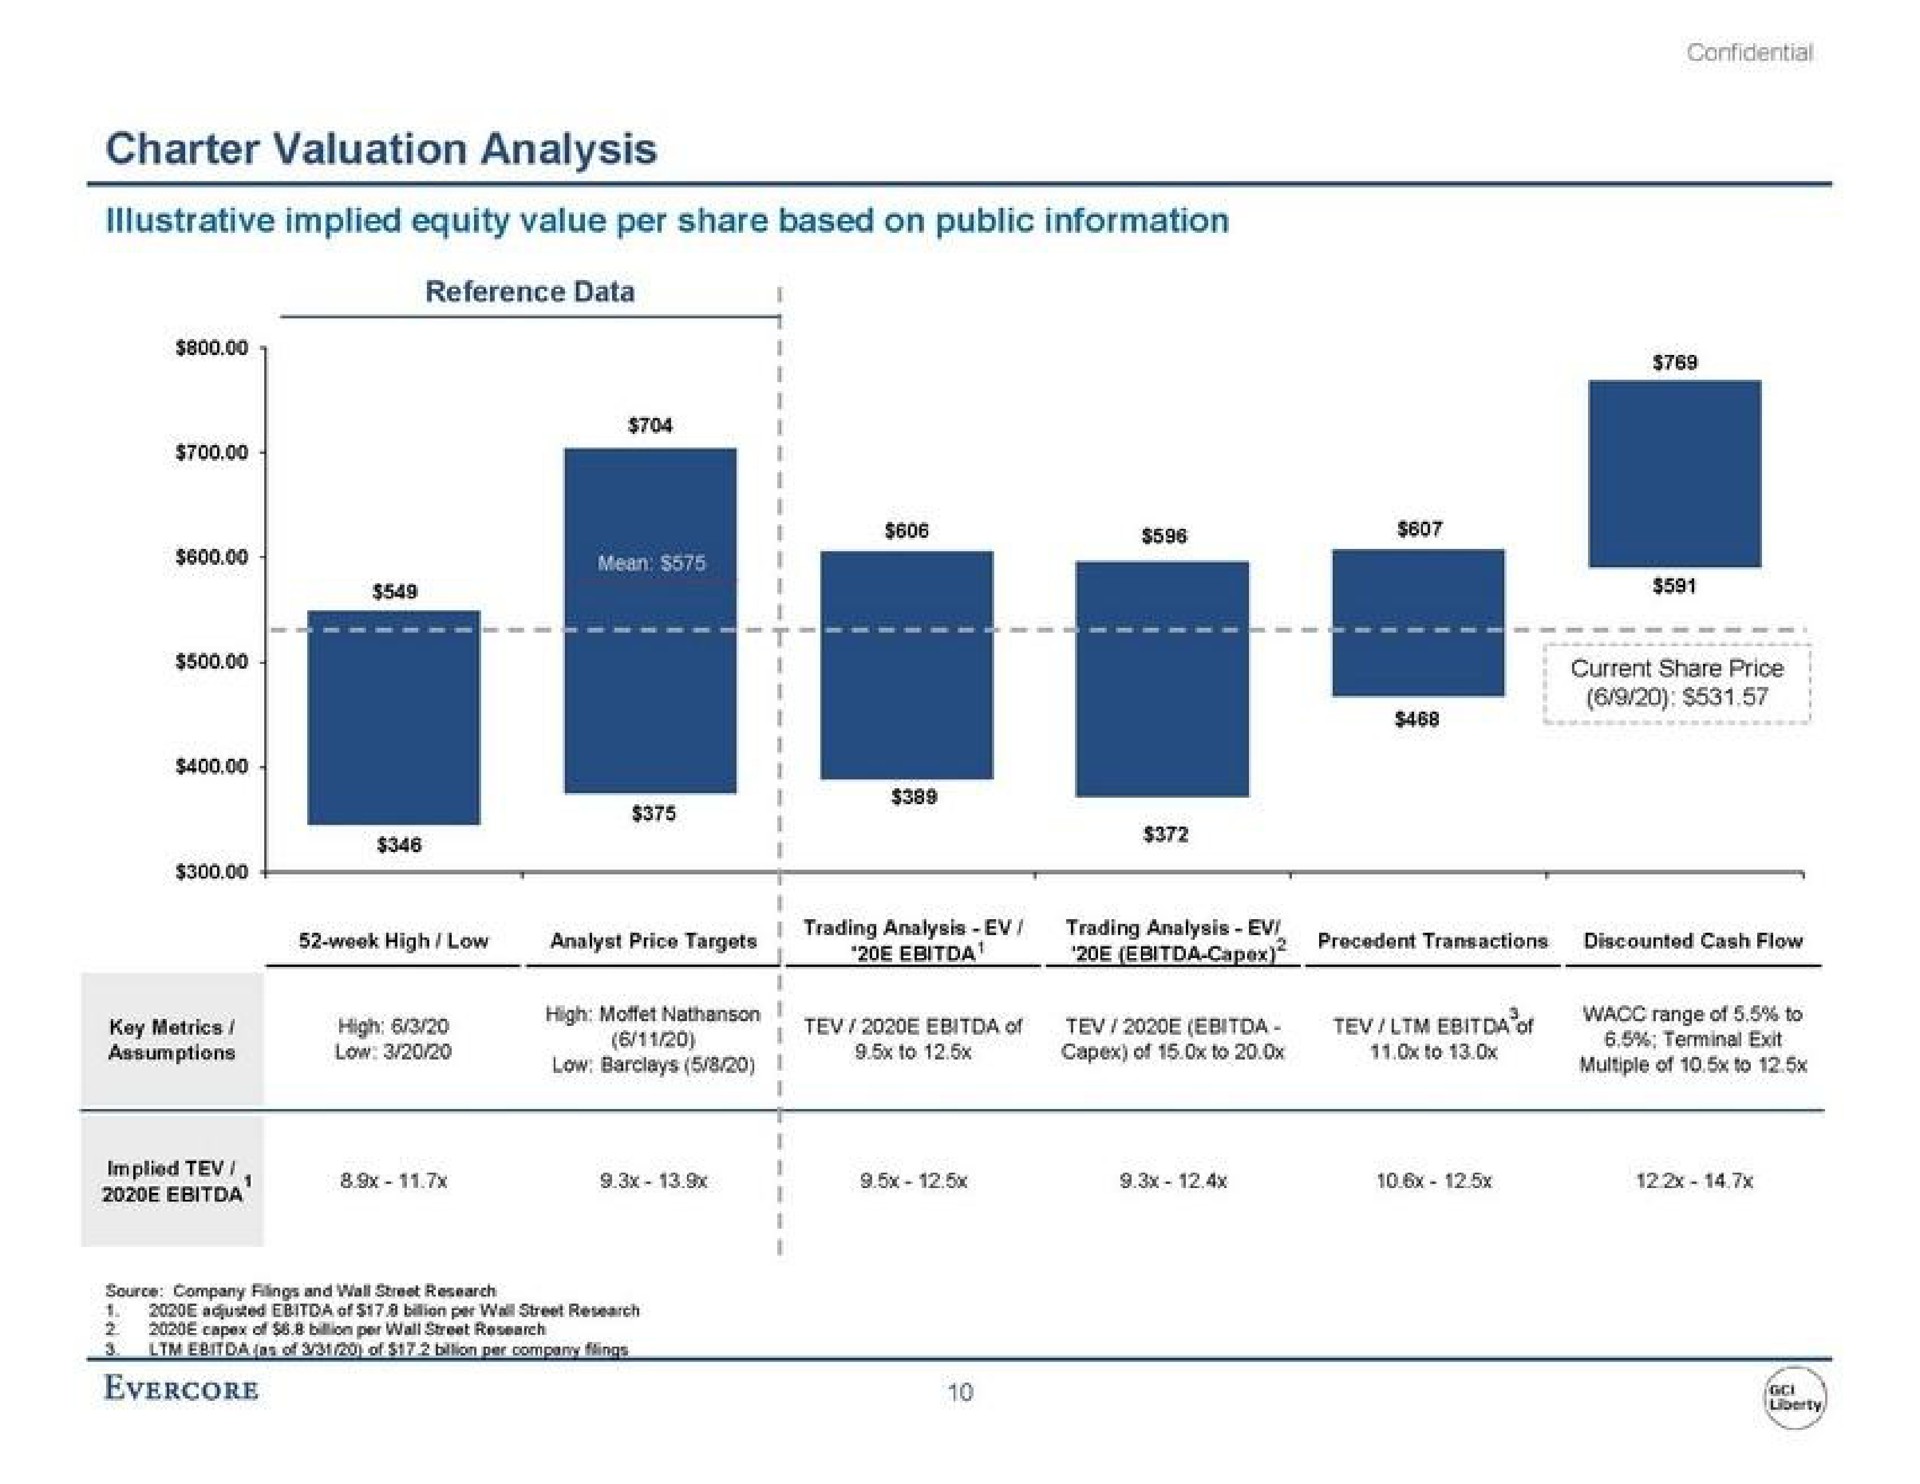 charter valuation analysis illustrative implied equity value per share based on public information key metrics high of of to wace range foci | Evercore